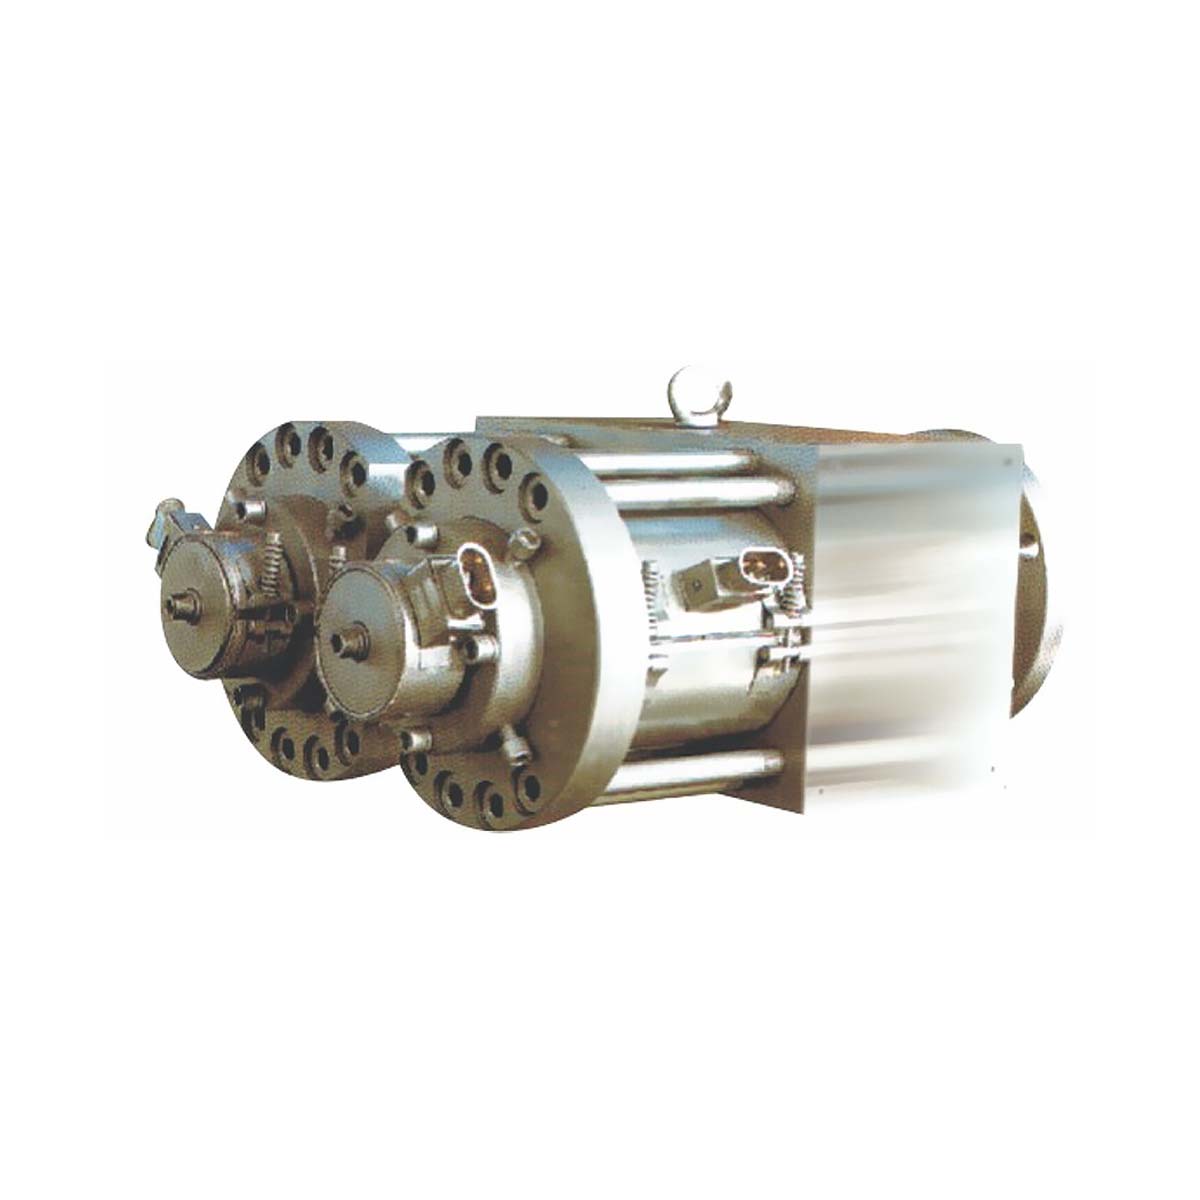 Twin Screw Extruder Manufacturers, Suppliers and Exporters in Delhi